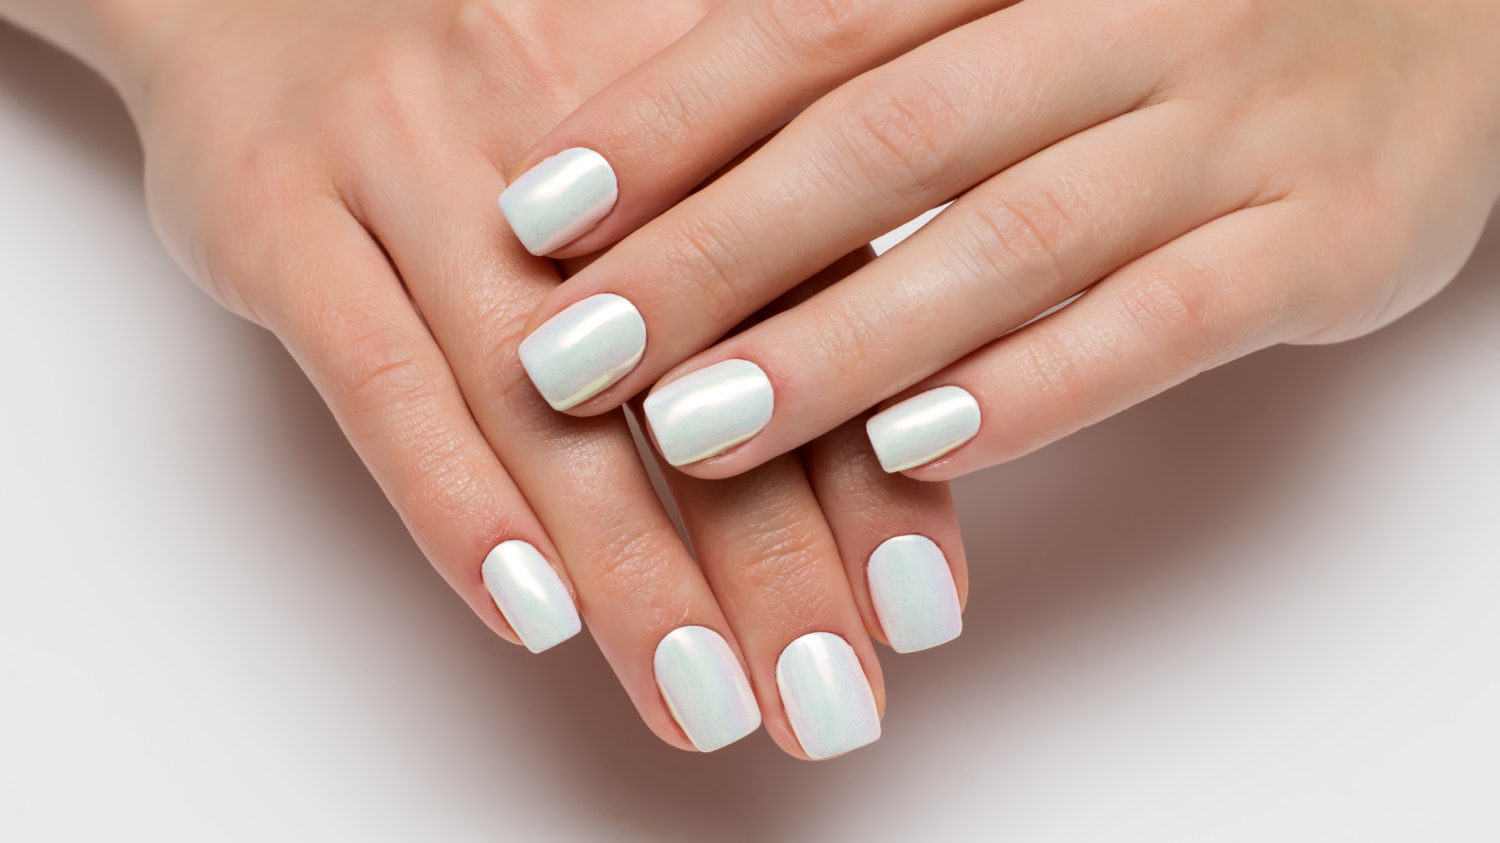 2. Simple and Elegant Short Nail Art Ideas - wide 7